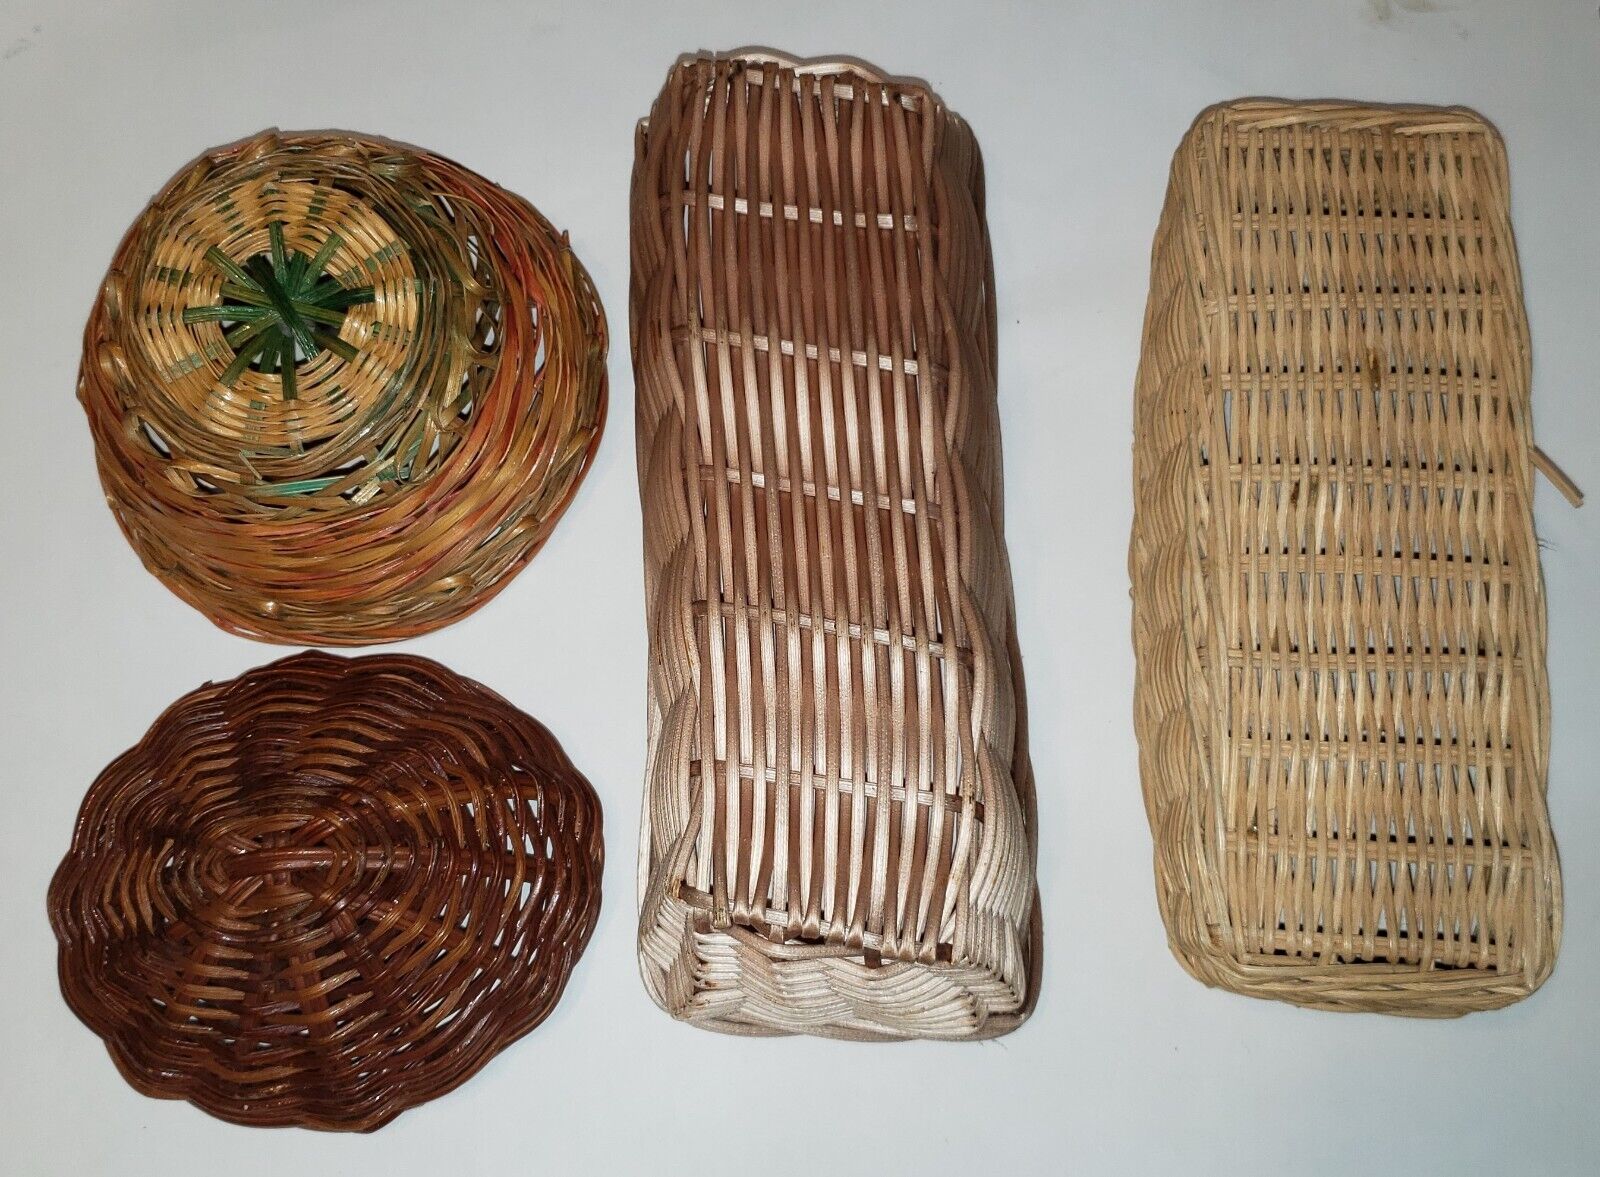 Lot of 4 Medium Vintage Woven Wicker Storage Baskets Various Sizes & Shapes